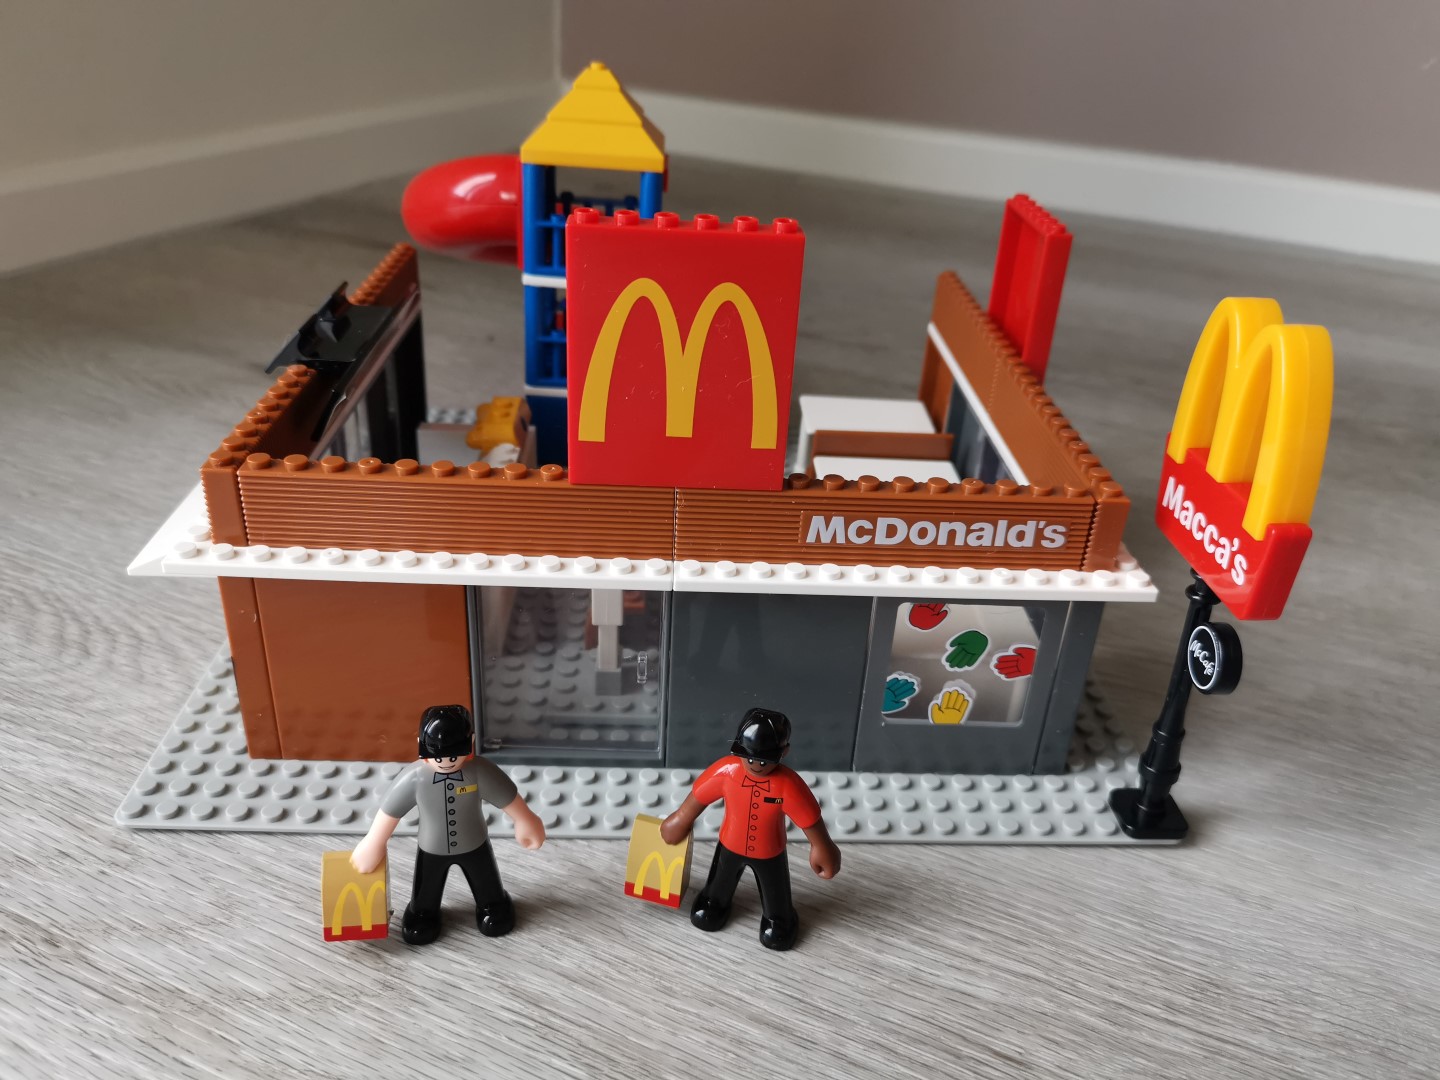 Maccas Is Launching Their Own Version Of LEGO: 'Macca's Makers' - 2EC